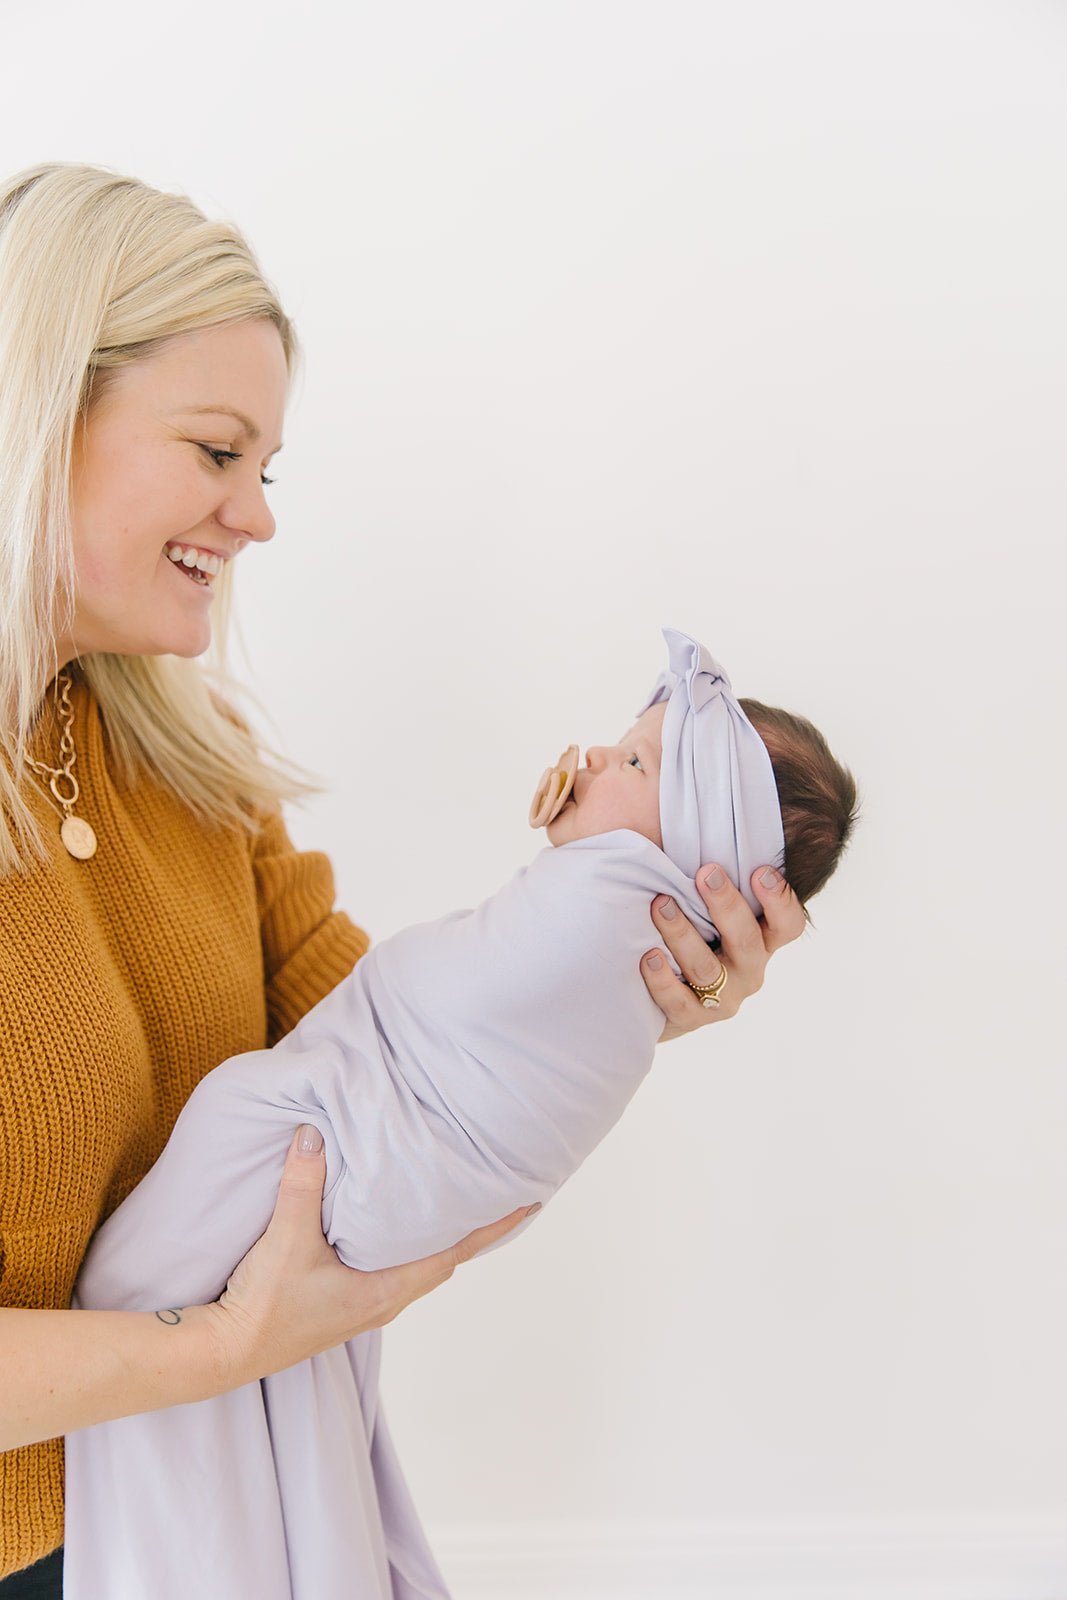 Everything New Moms Need to Prepare to Bring Home a Newborn Baby